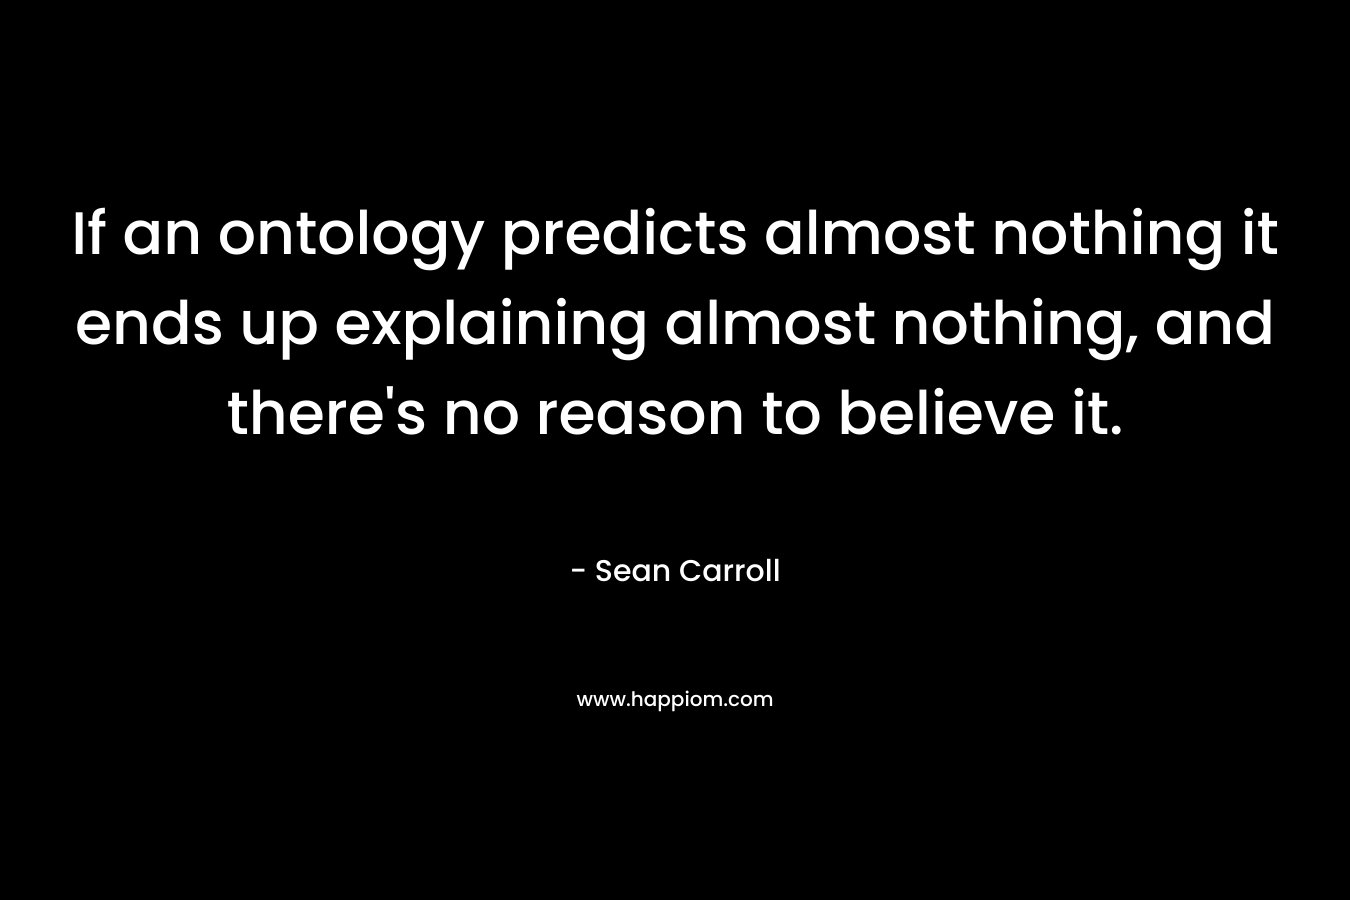 If an ontology predicts almost nothing it ends up explaining almost nothing, and there’s no reason to believe it. – Sean Carroll